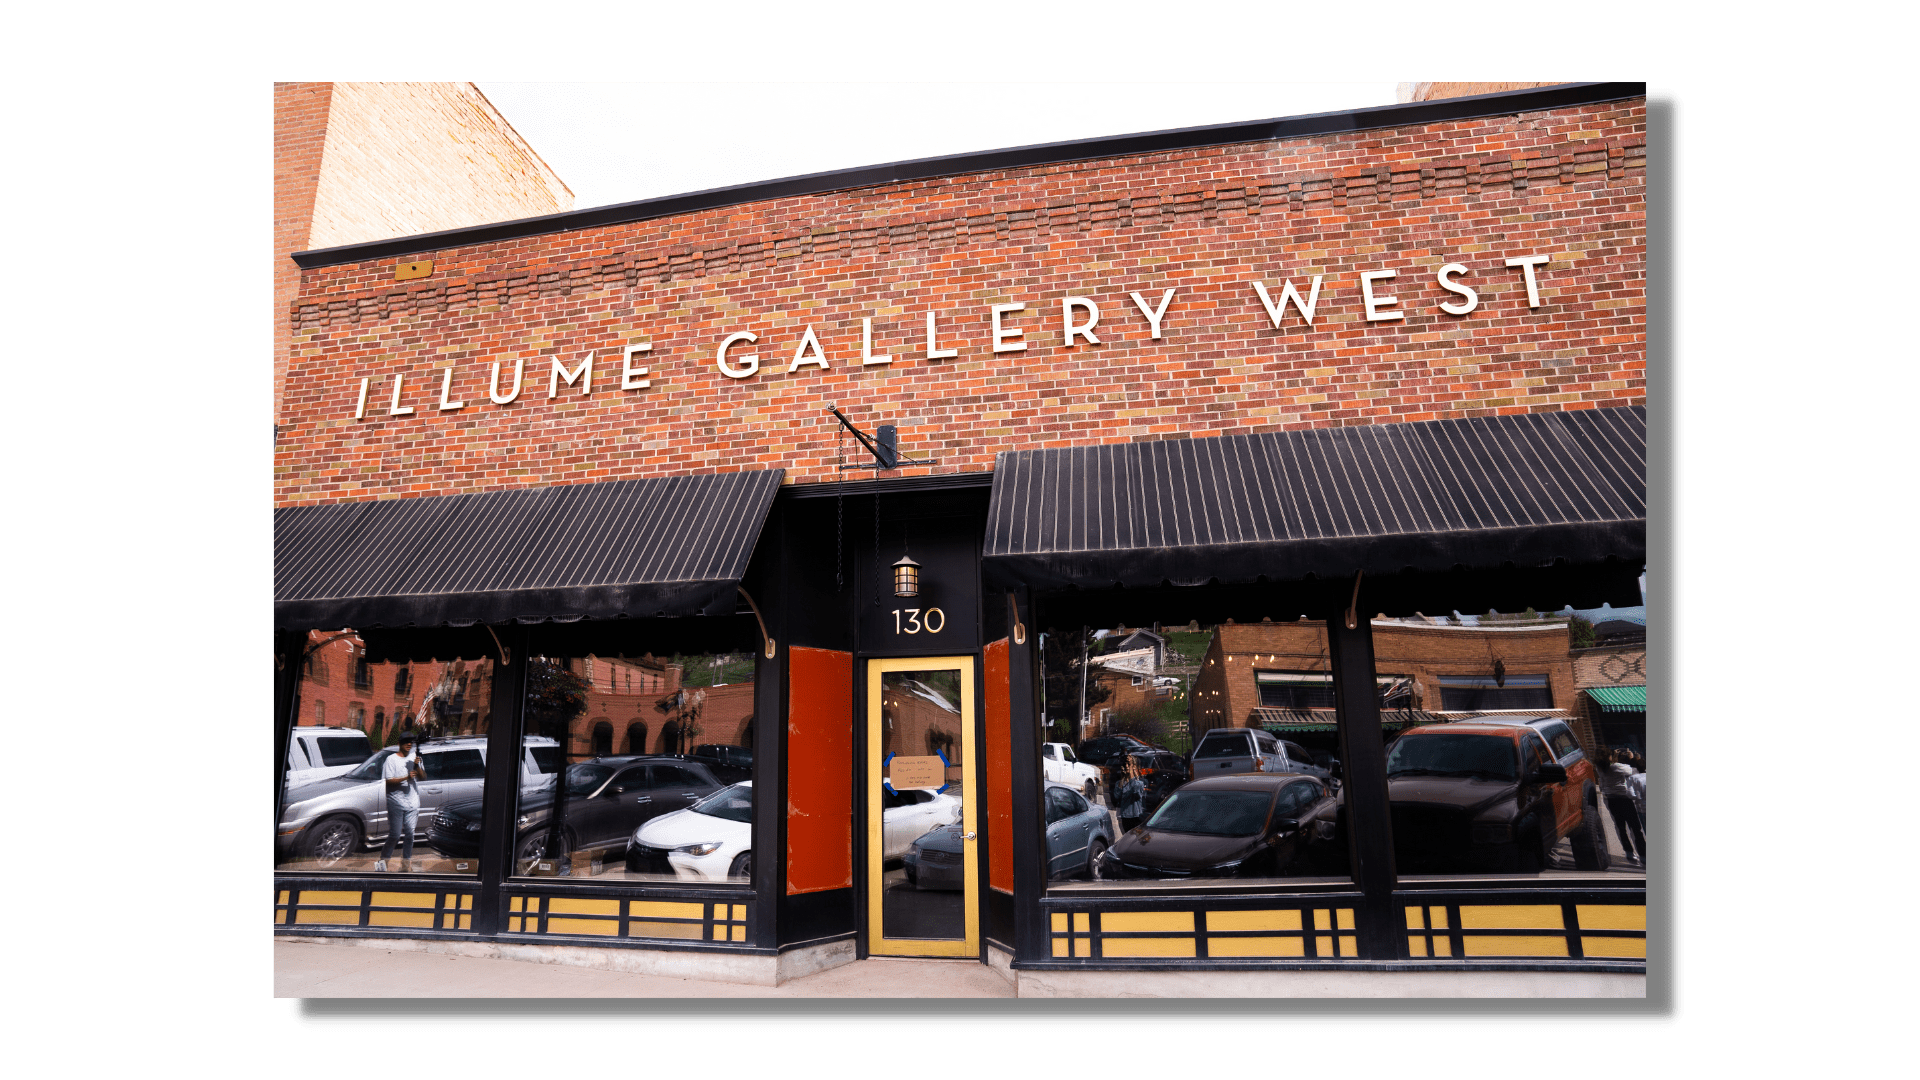 Image of the Illume Gallery West storefront